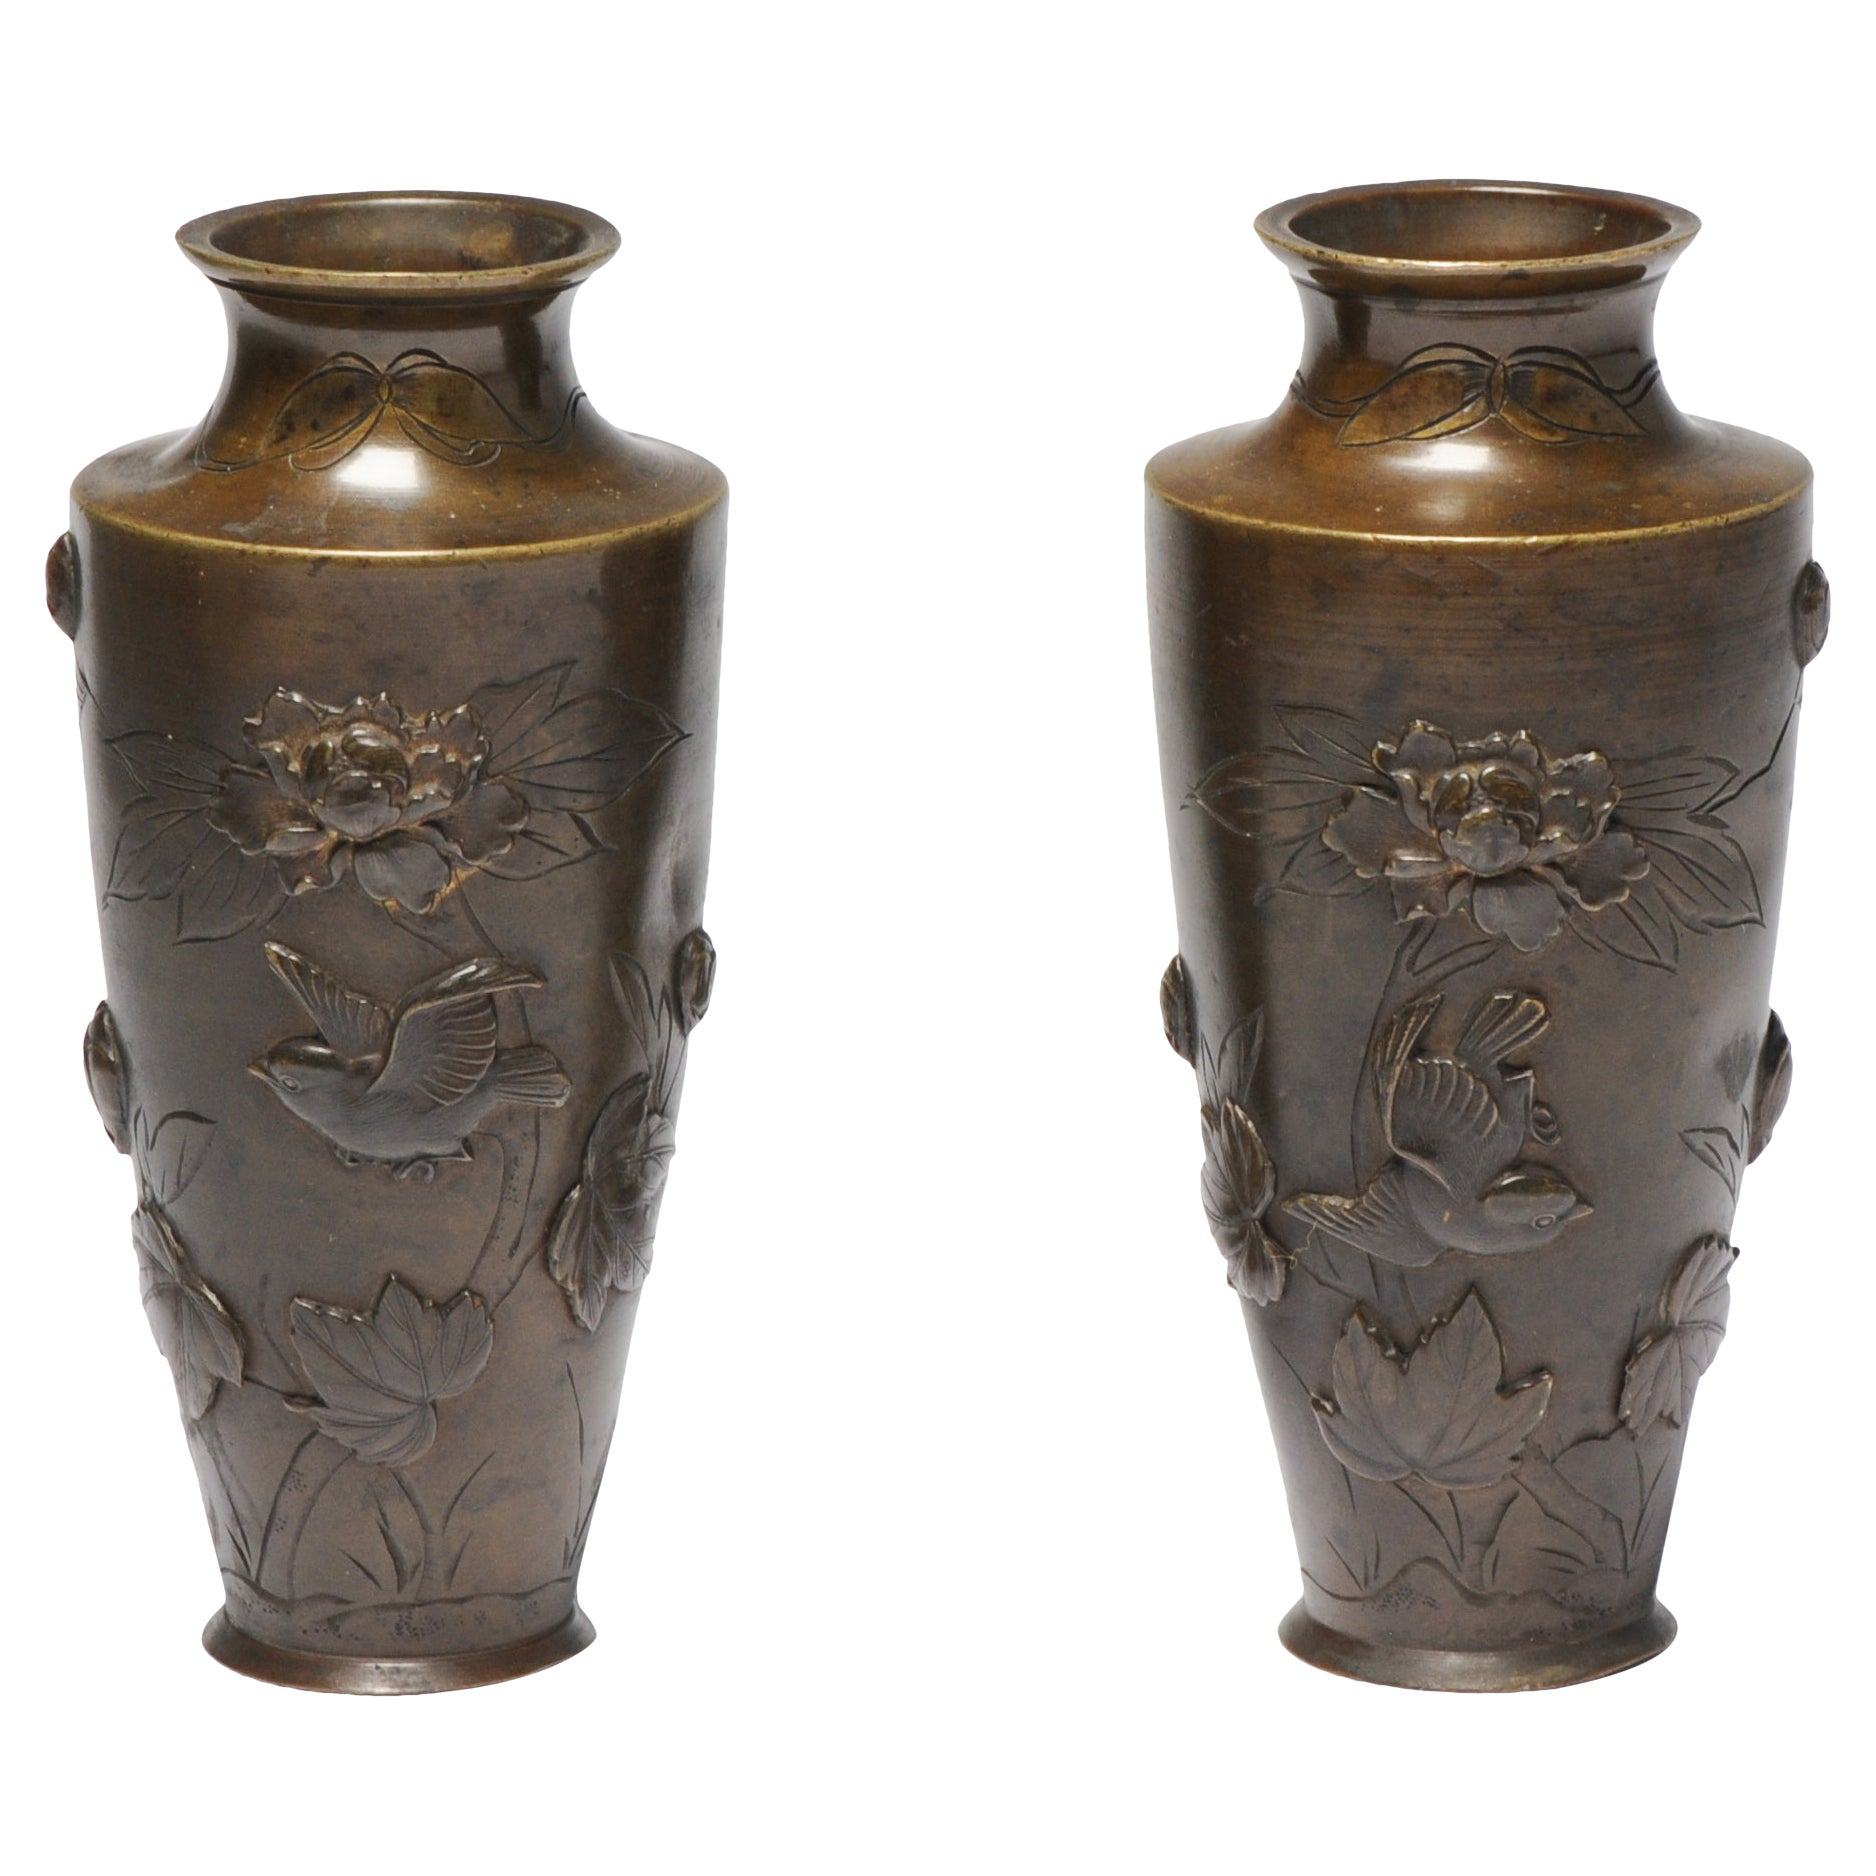 Antique Japanese Bronze Meiji Vase with Birds and Flowers, 19th Century For Sale